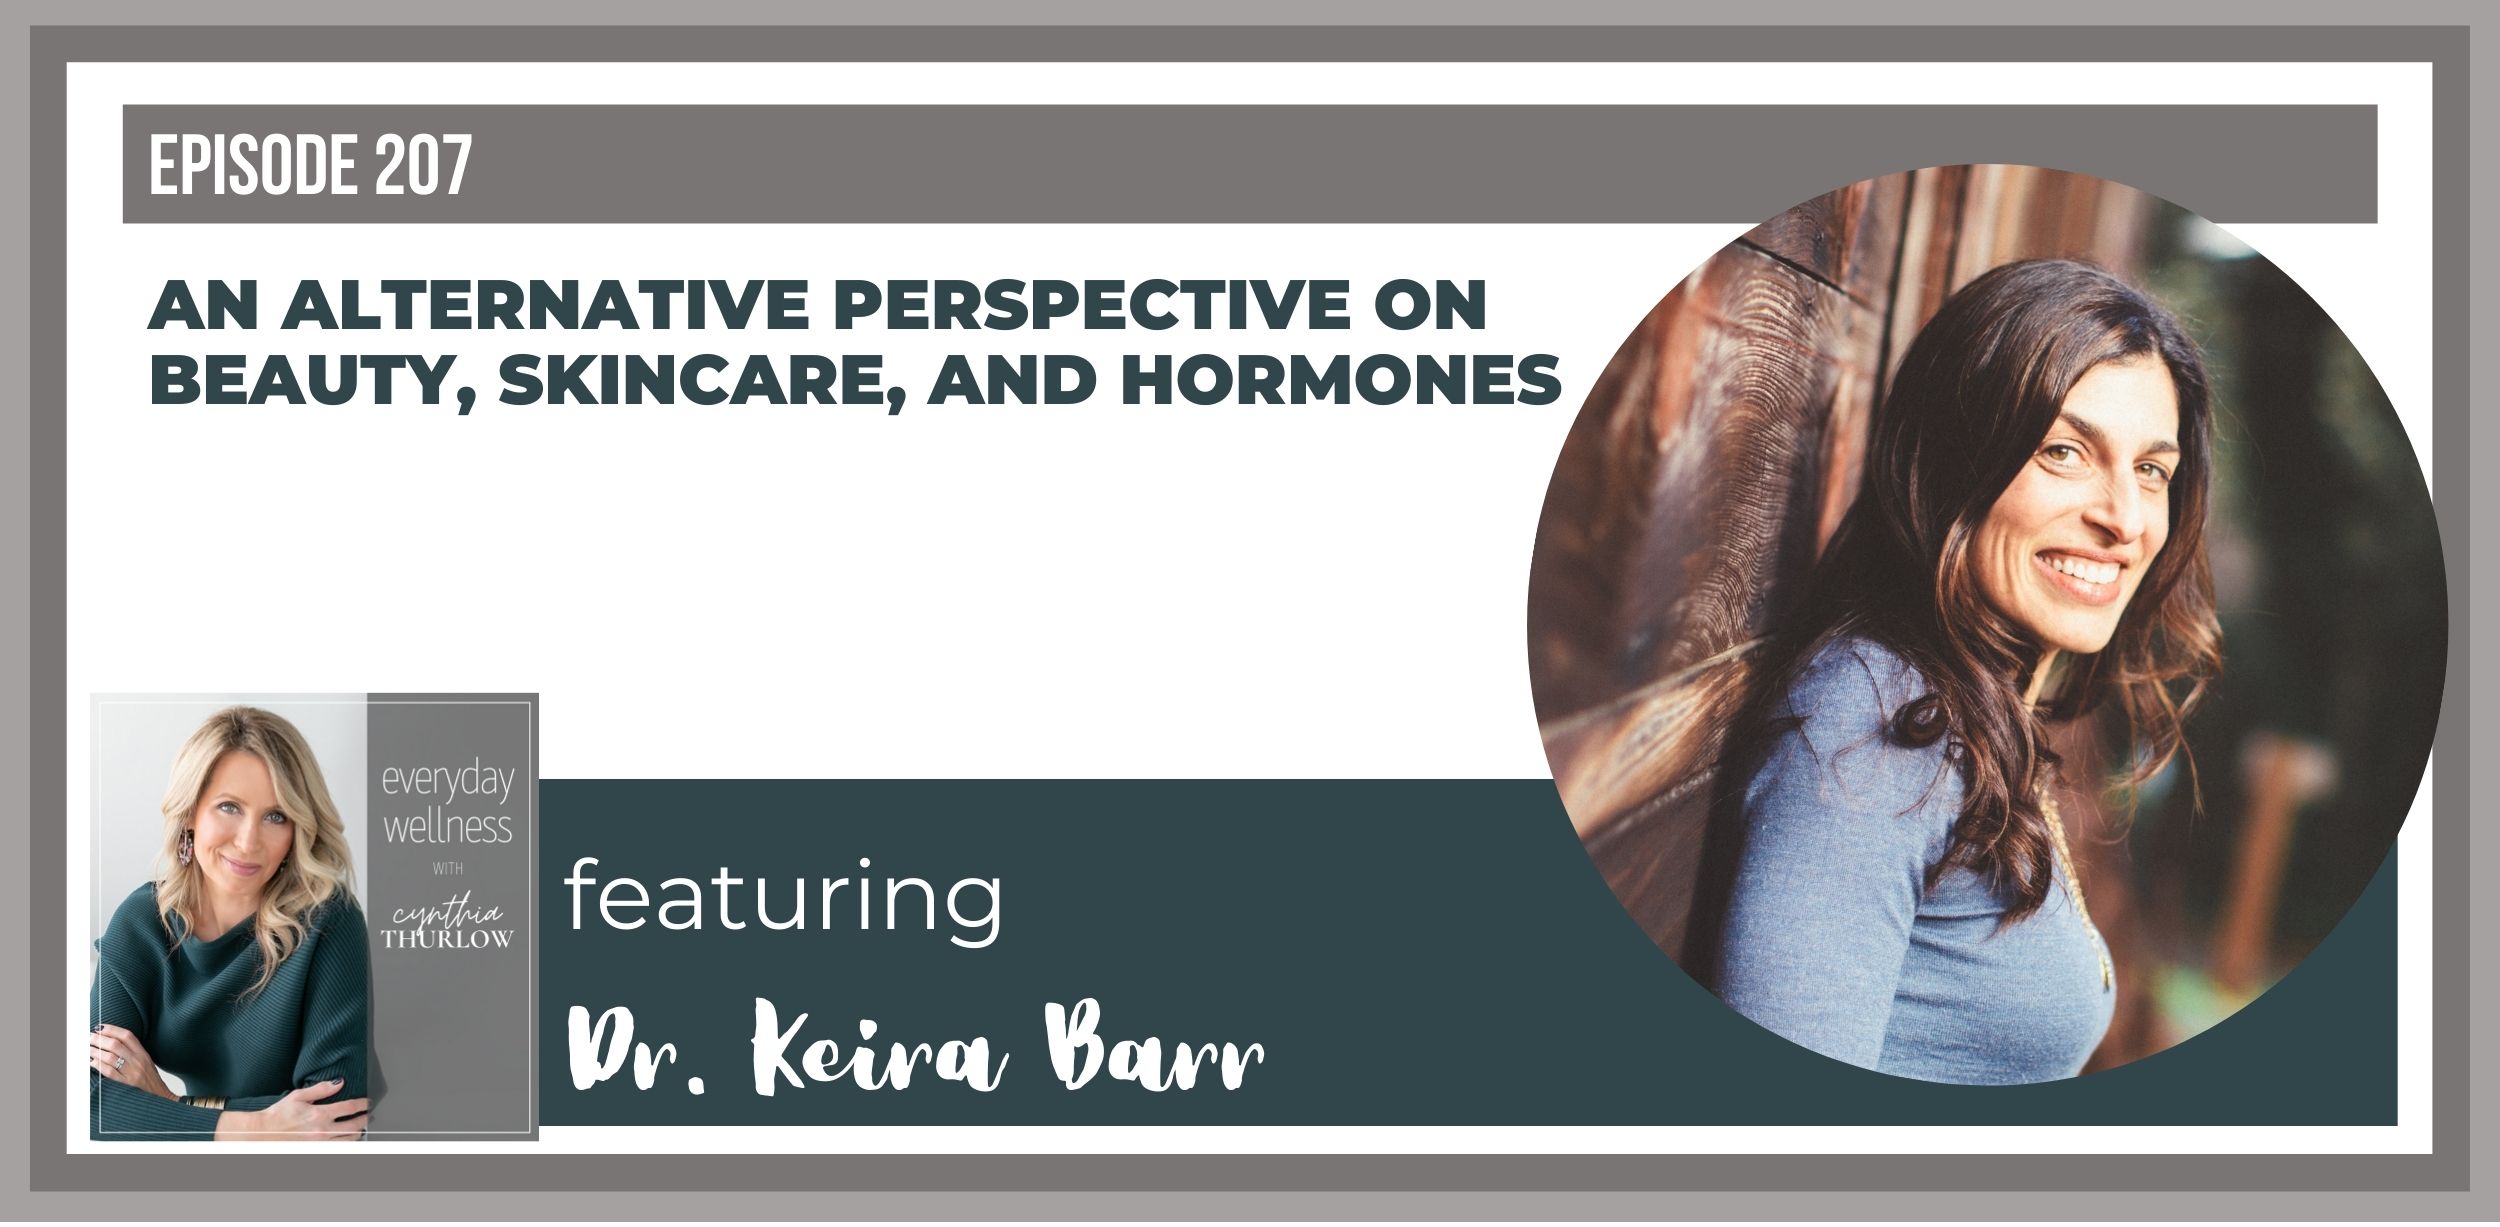 Alternative Perspective on, Skincare, and Hormones Dr